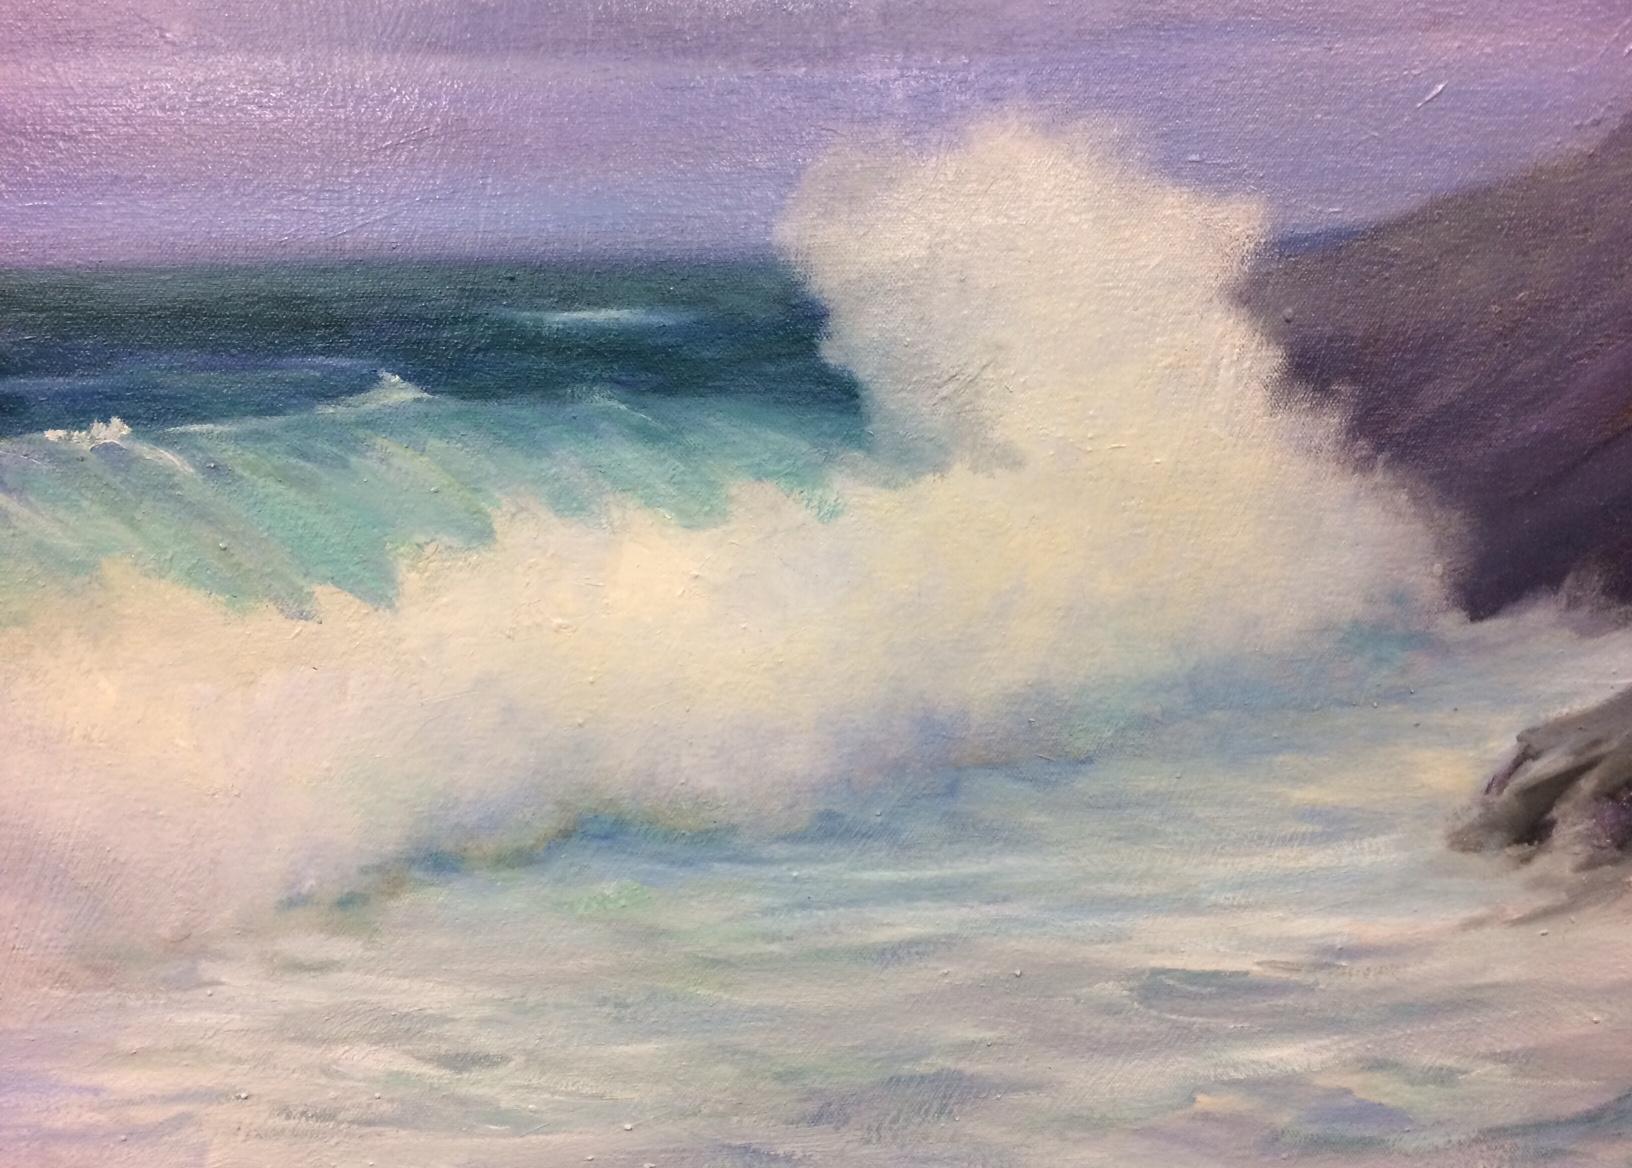 Late Morning at the Atlantic, original 24x42 impressionist landscape - Gray Landscape Painting by James McGinley